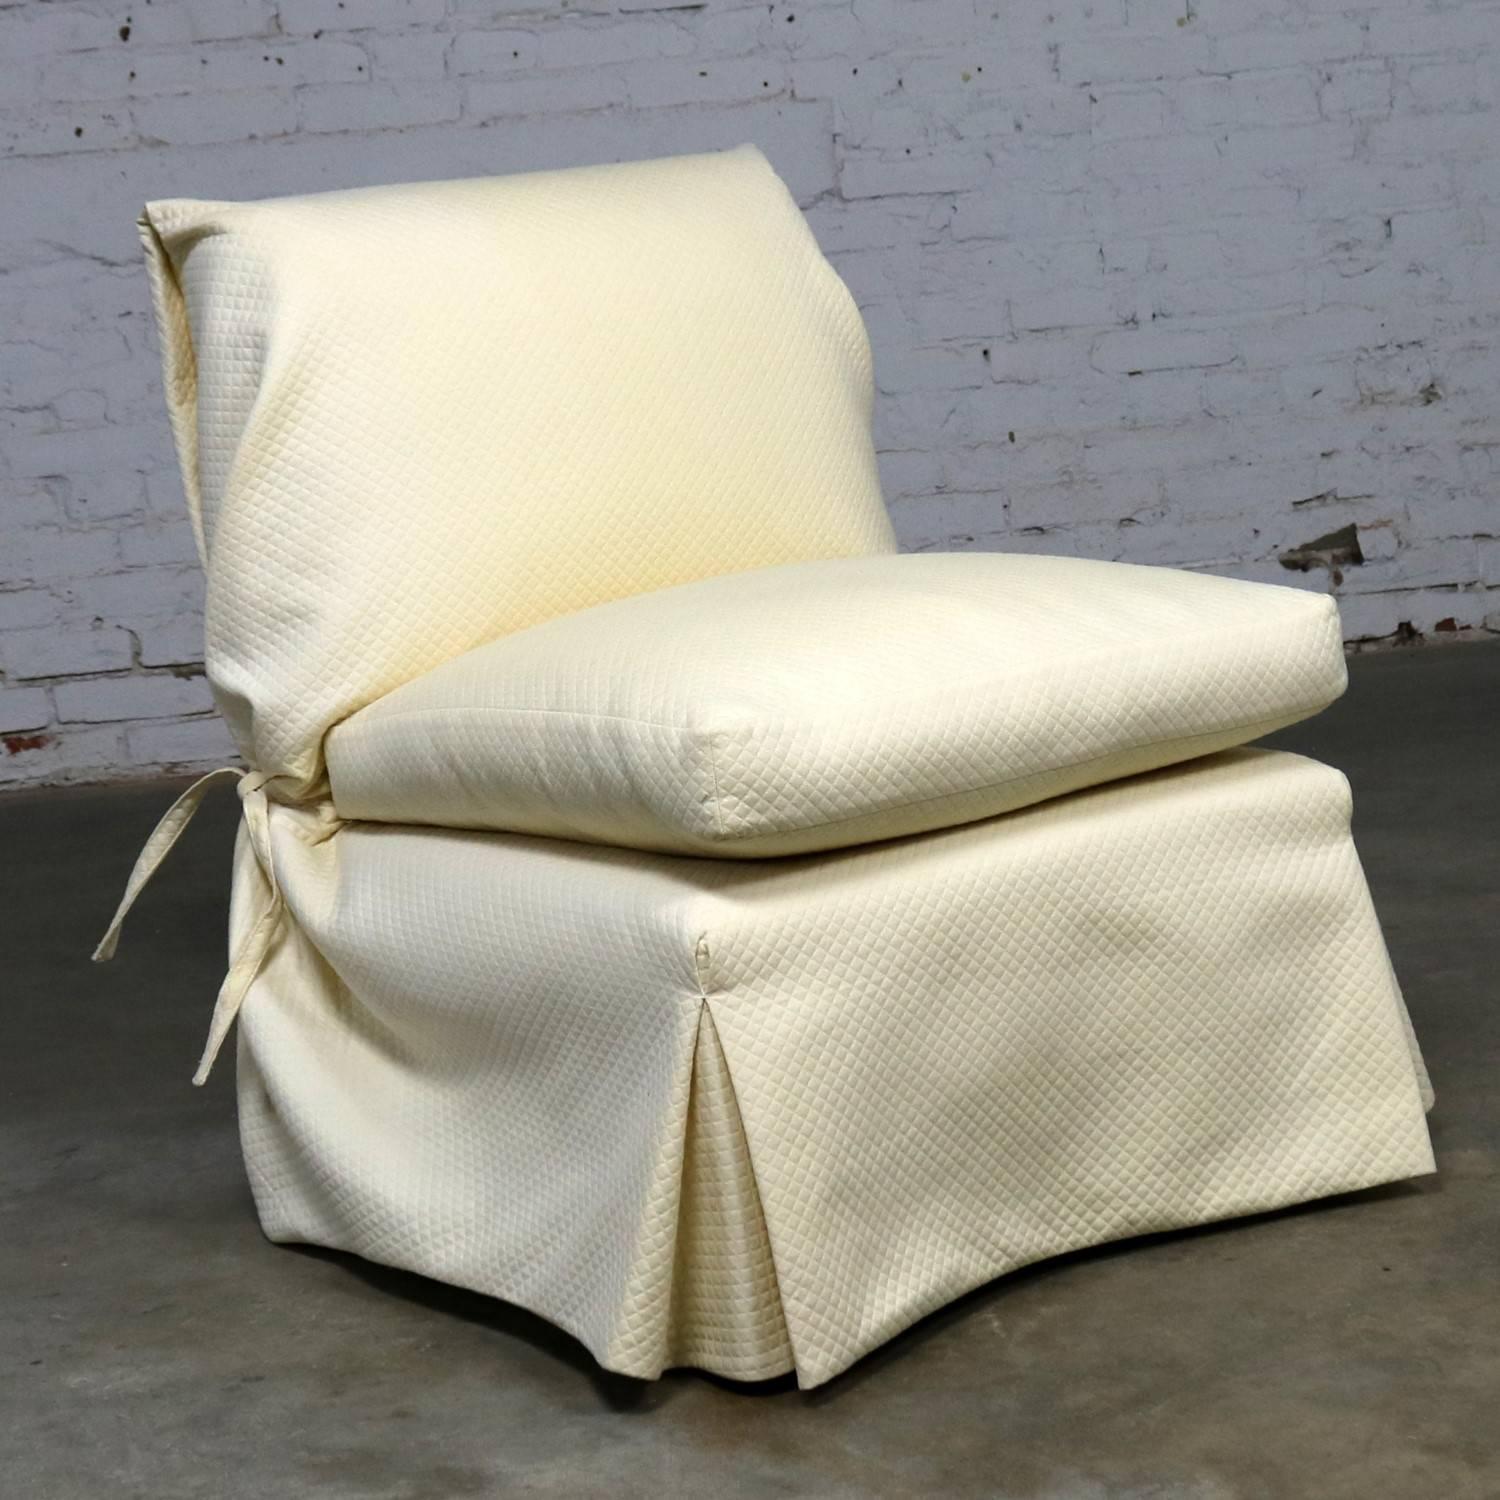 Donghia Slipper Chair by Angelo Donghia, One Slipcovered One Not 1